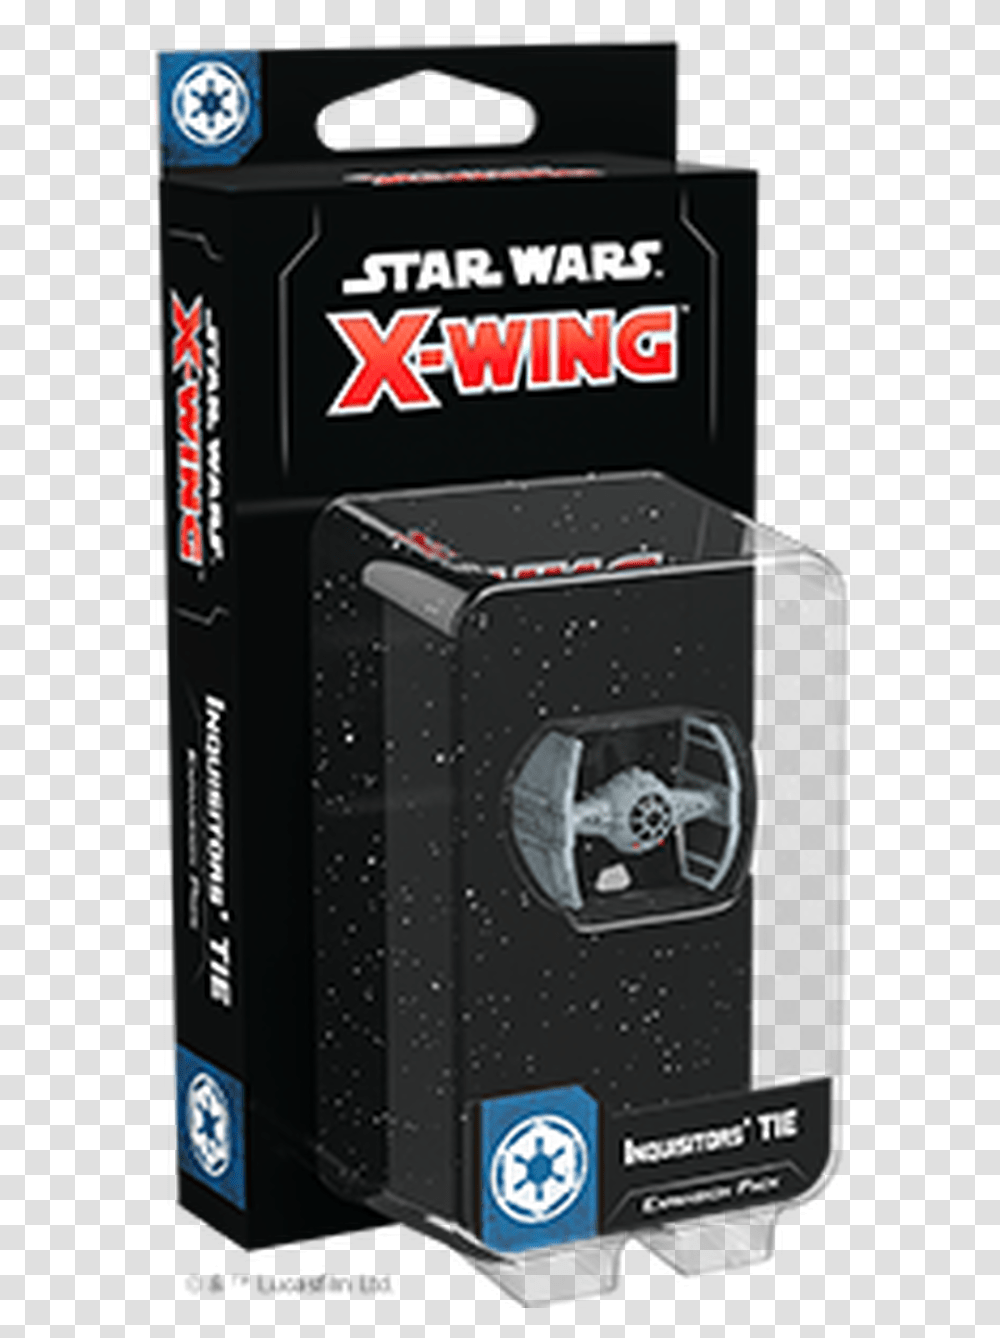 Star Wars X Wing Nantex Class Starfighter Expansion Pack 2nd Edition, Gas Pump, Machine, Safe, Electrical Device Transparent Png